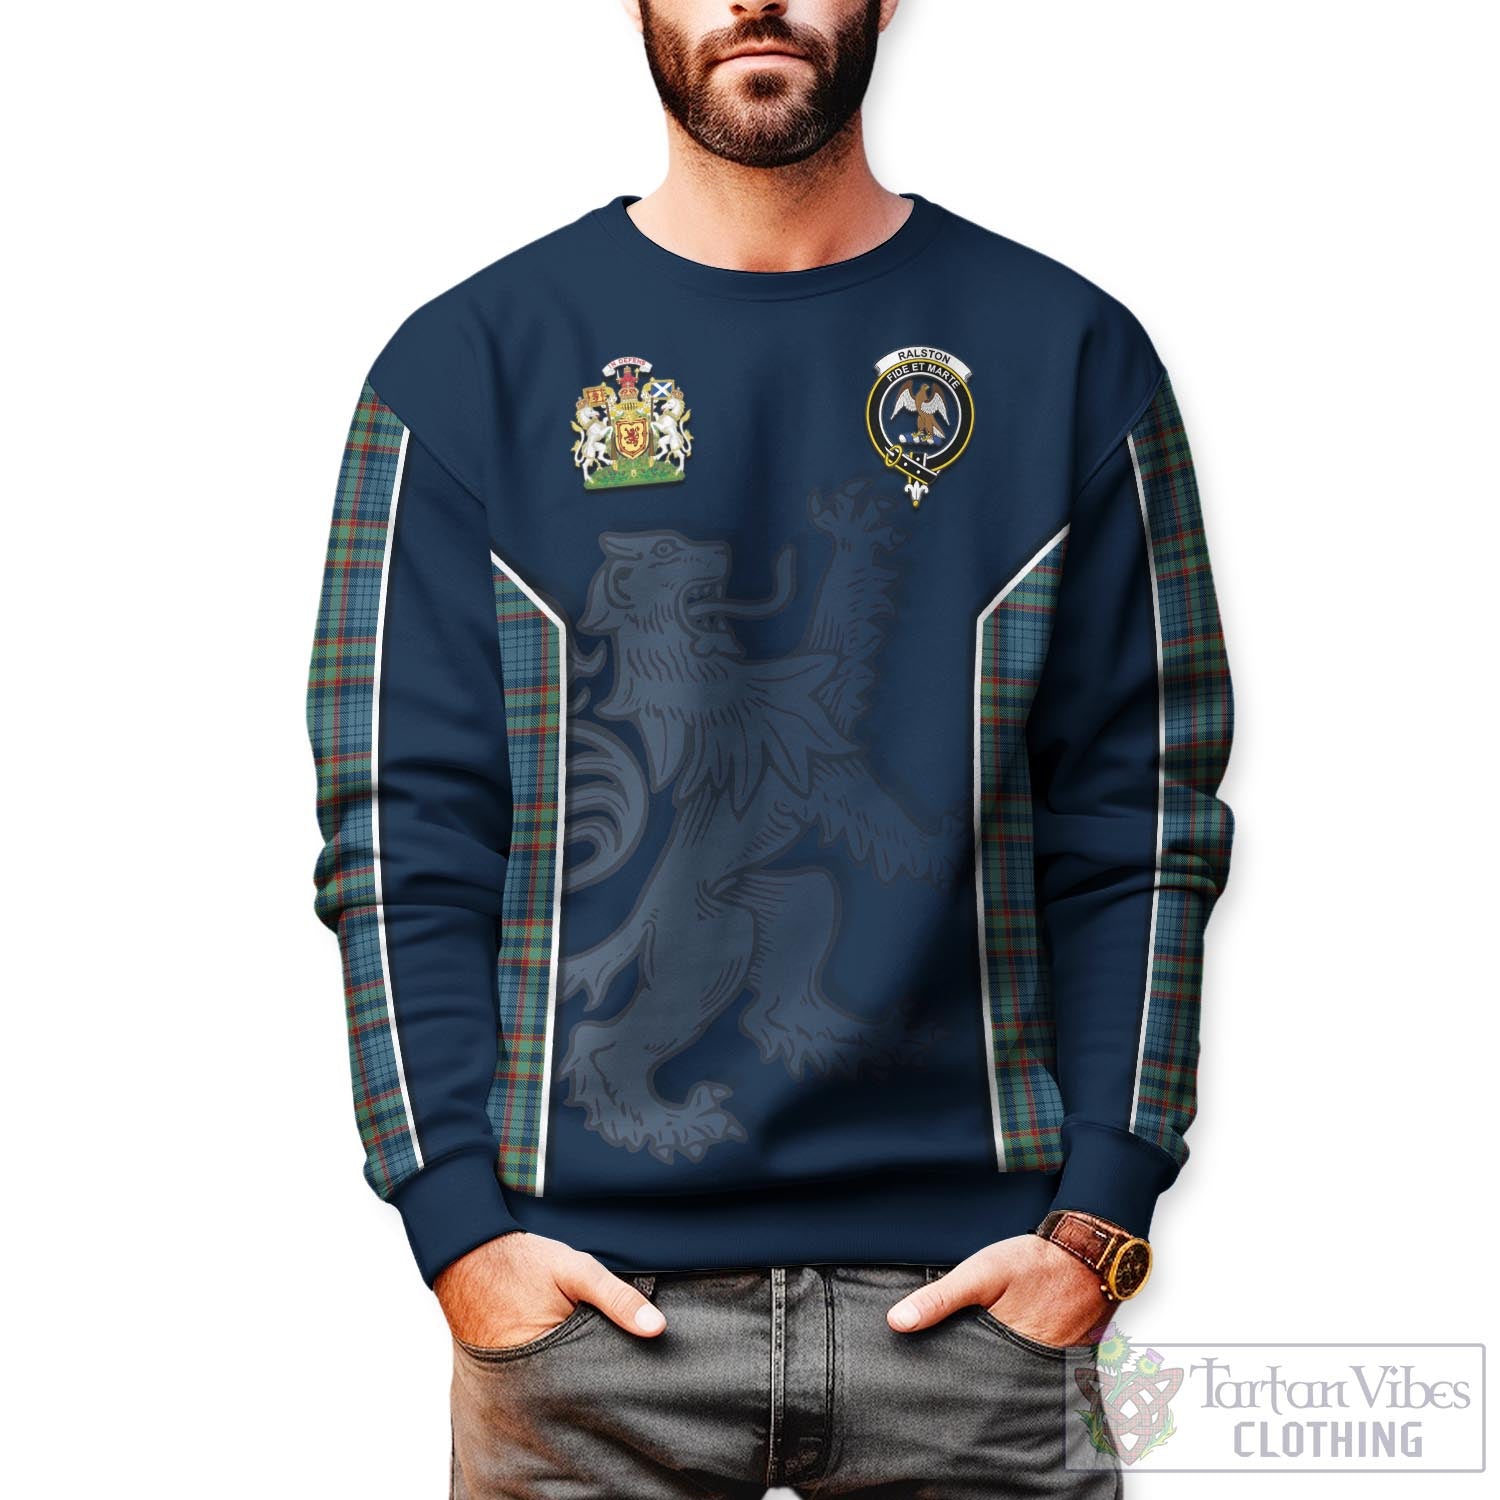 Tartan Vibes Clothing Ralston UK Tartan Sweater with Family Crest and Lion Rampant Vibes Sport Style